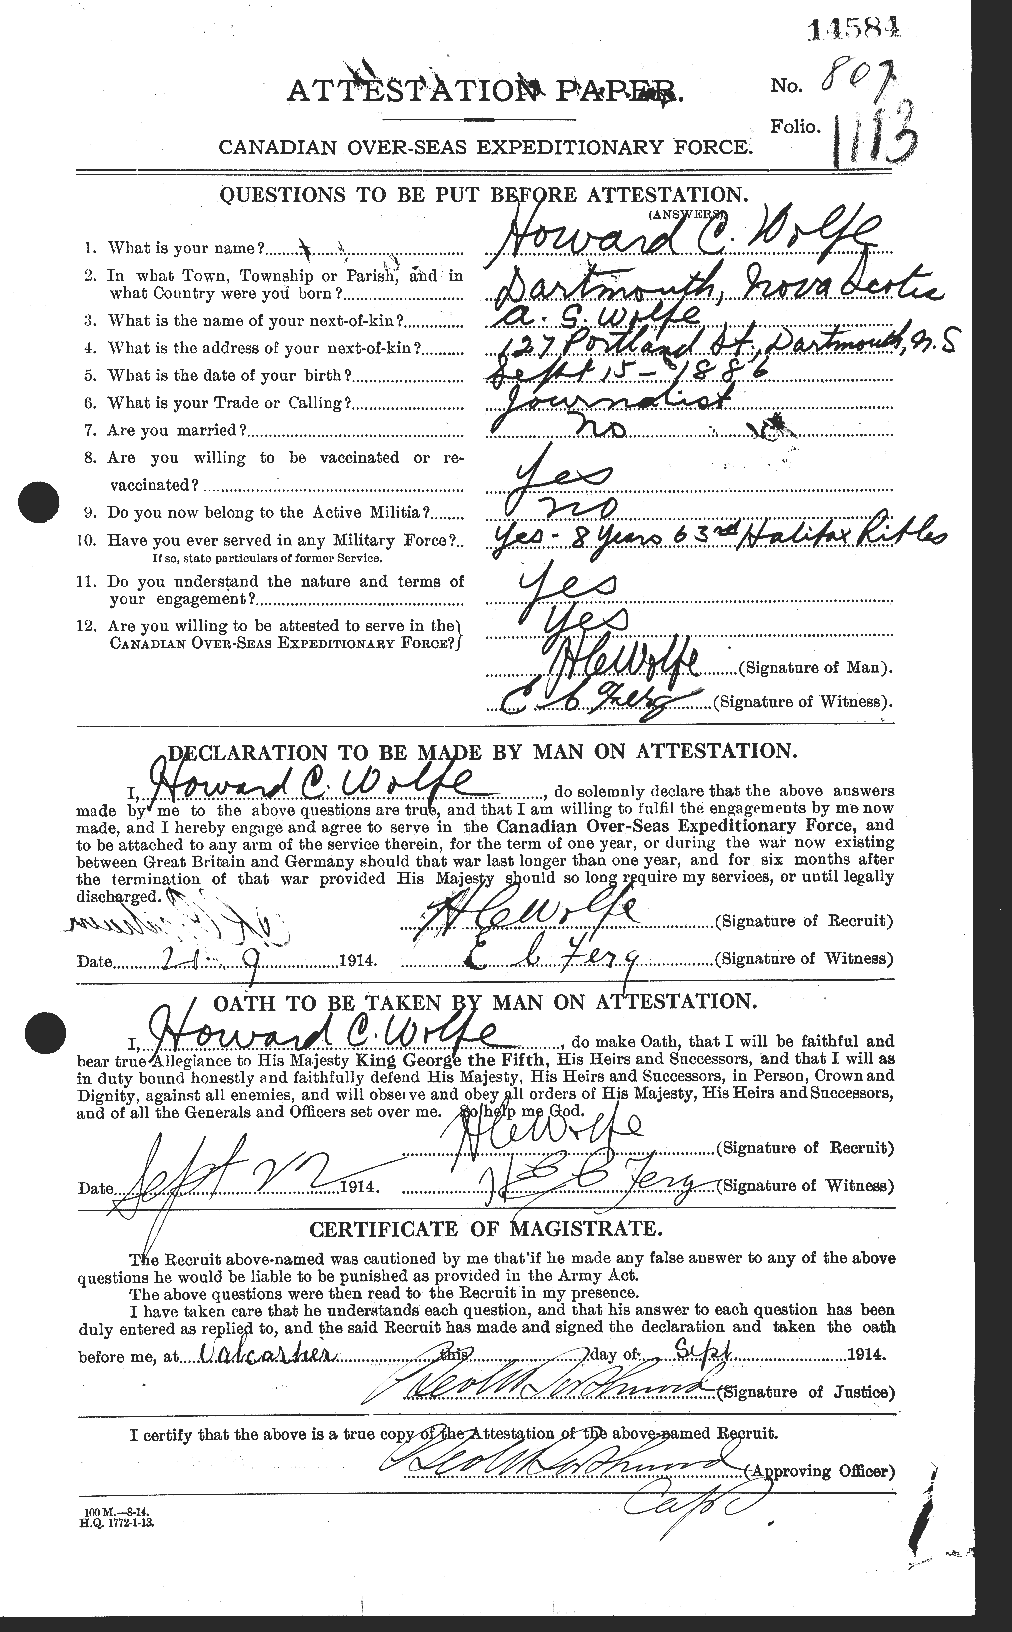 Personnel Records of the First World War - CEF 682367a